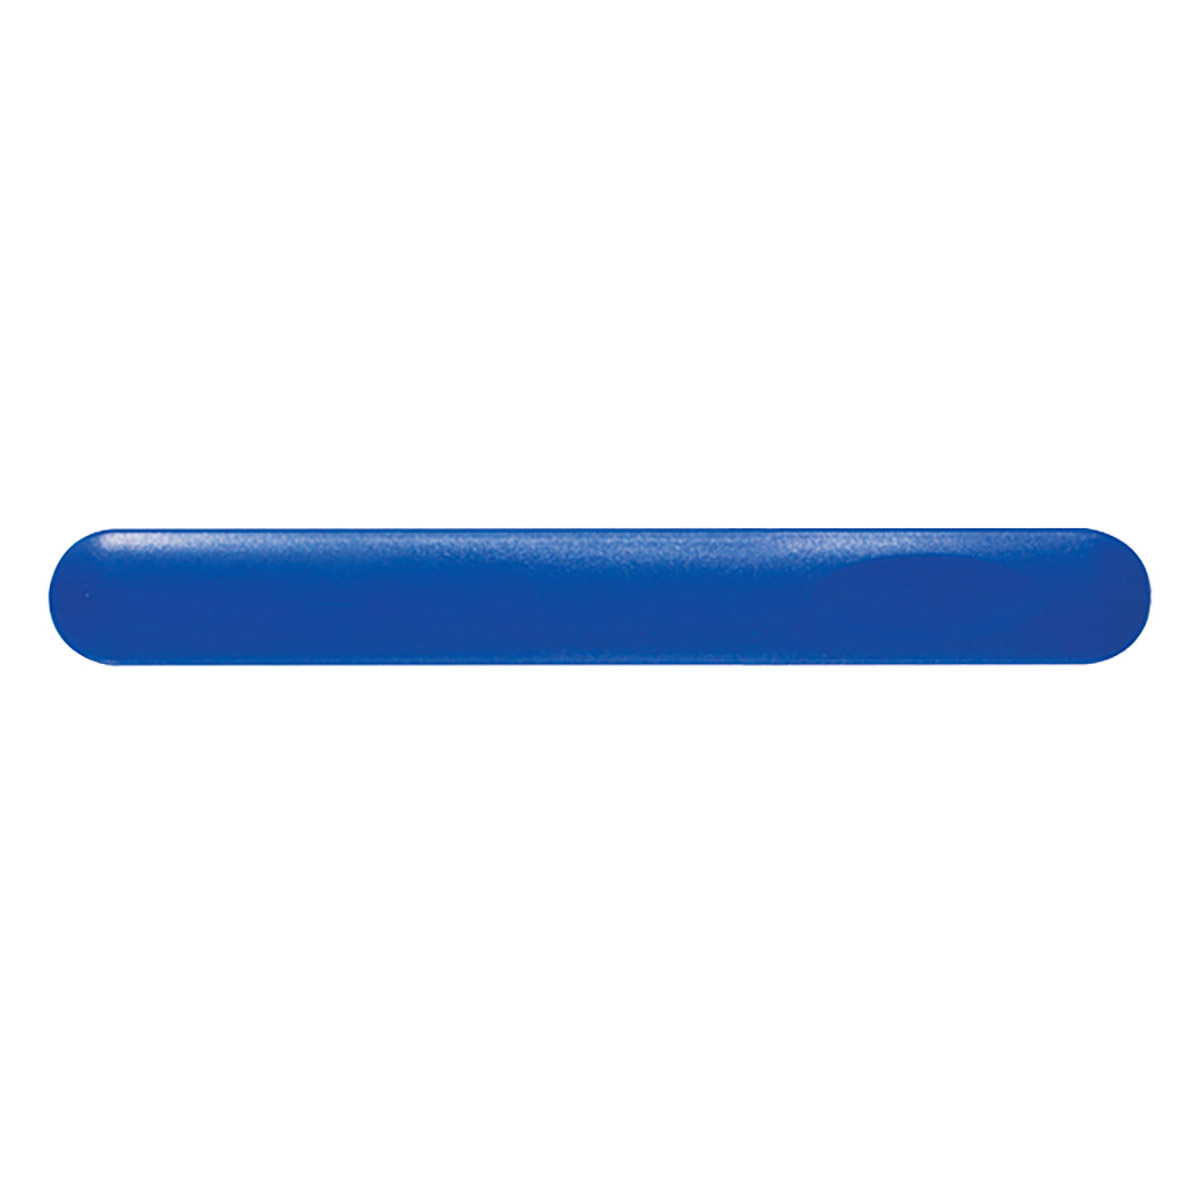 Blue Nail File in Plastic Sleeve